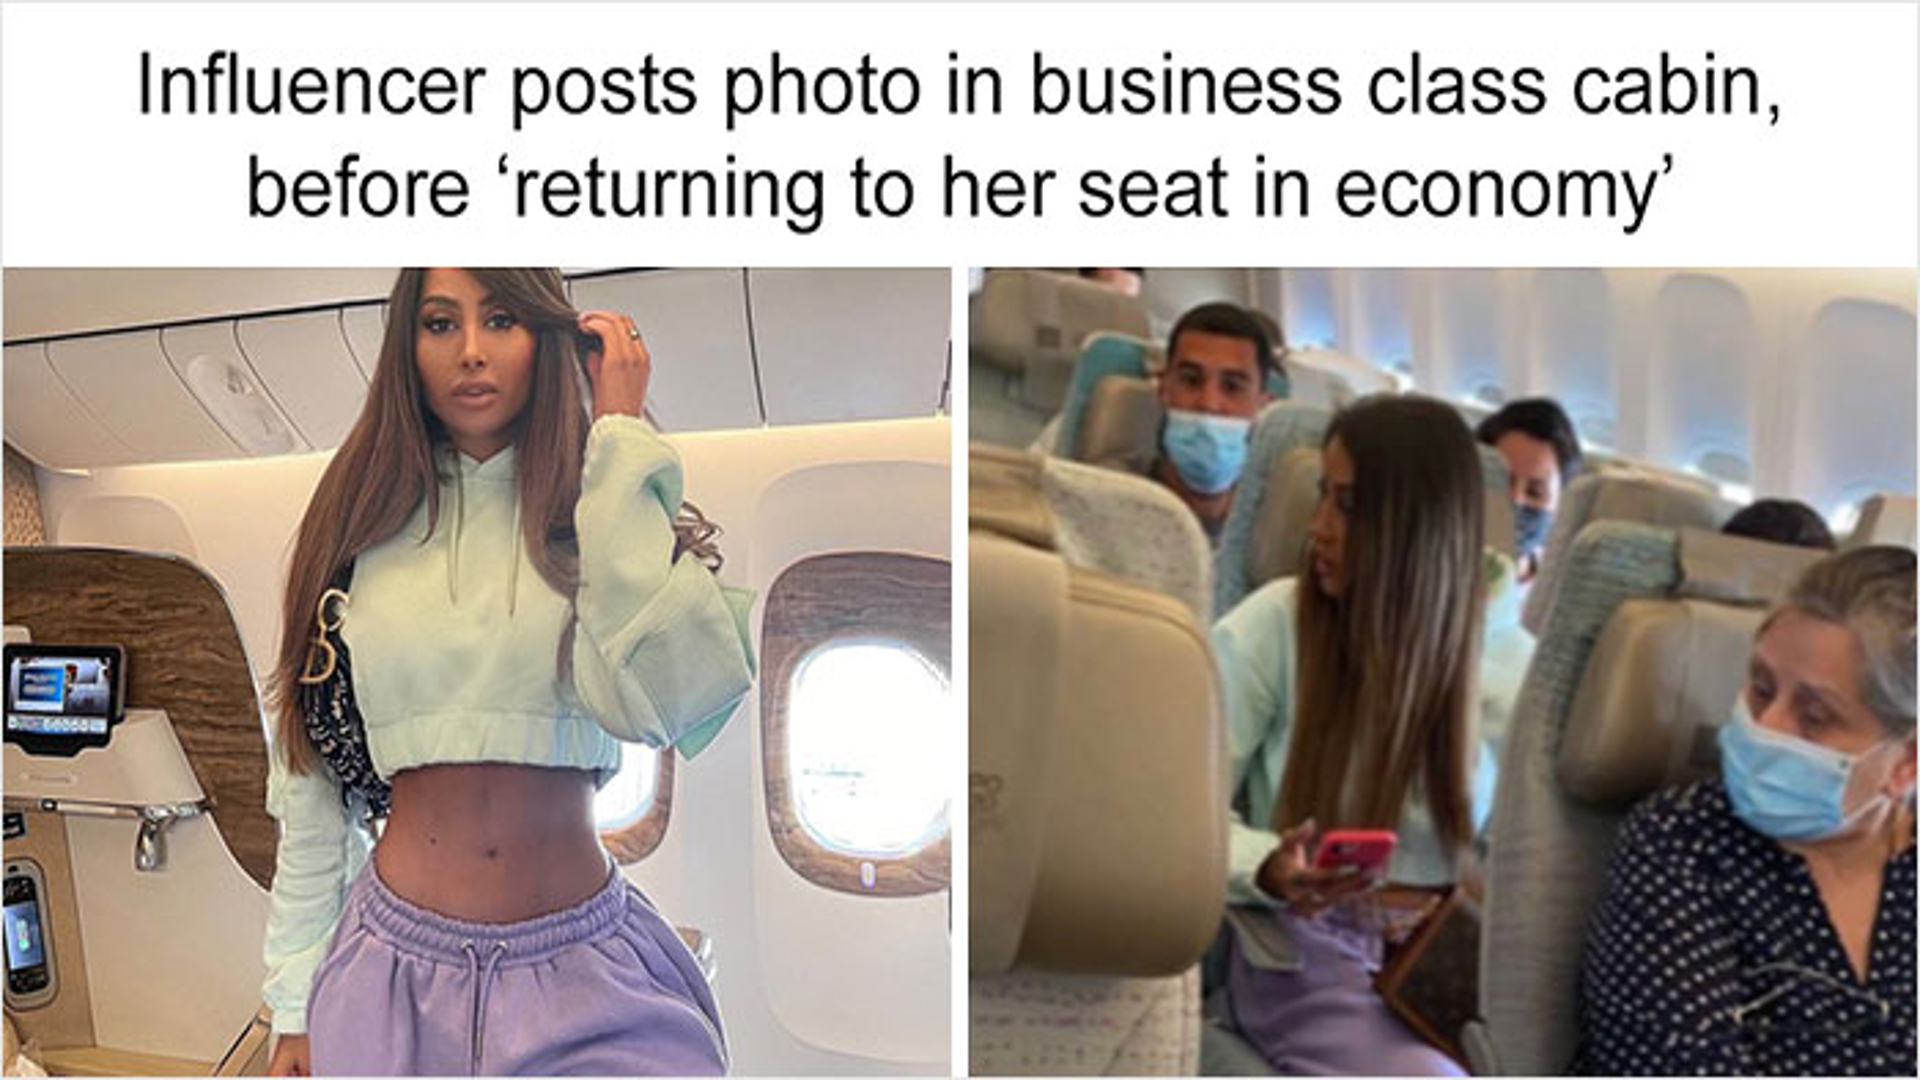 dystopian society things - business class flight - Influencer posts photo in business class cabin, before 'returning to her seat in economy